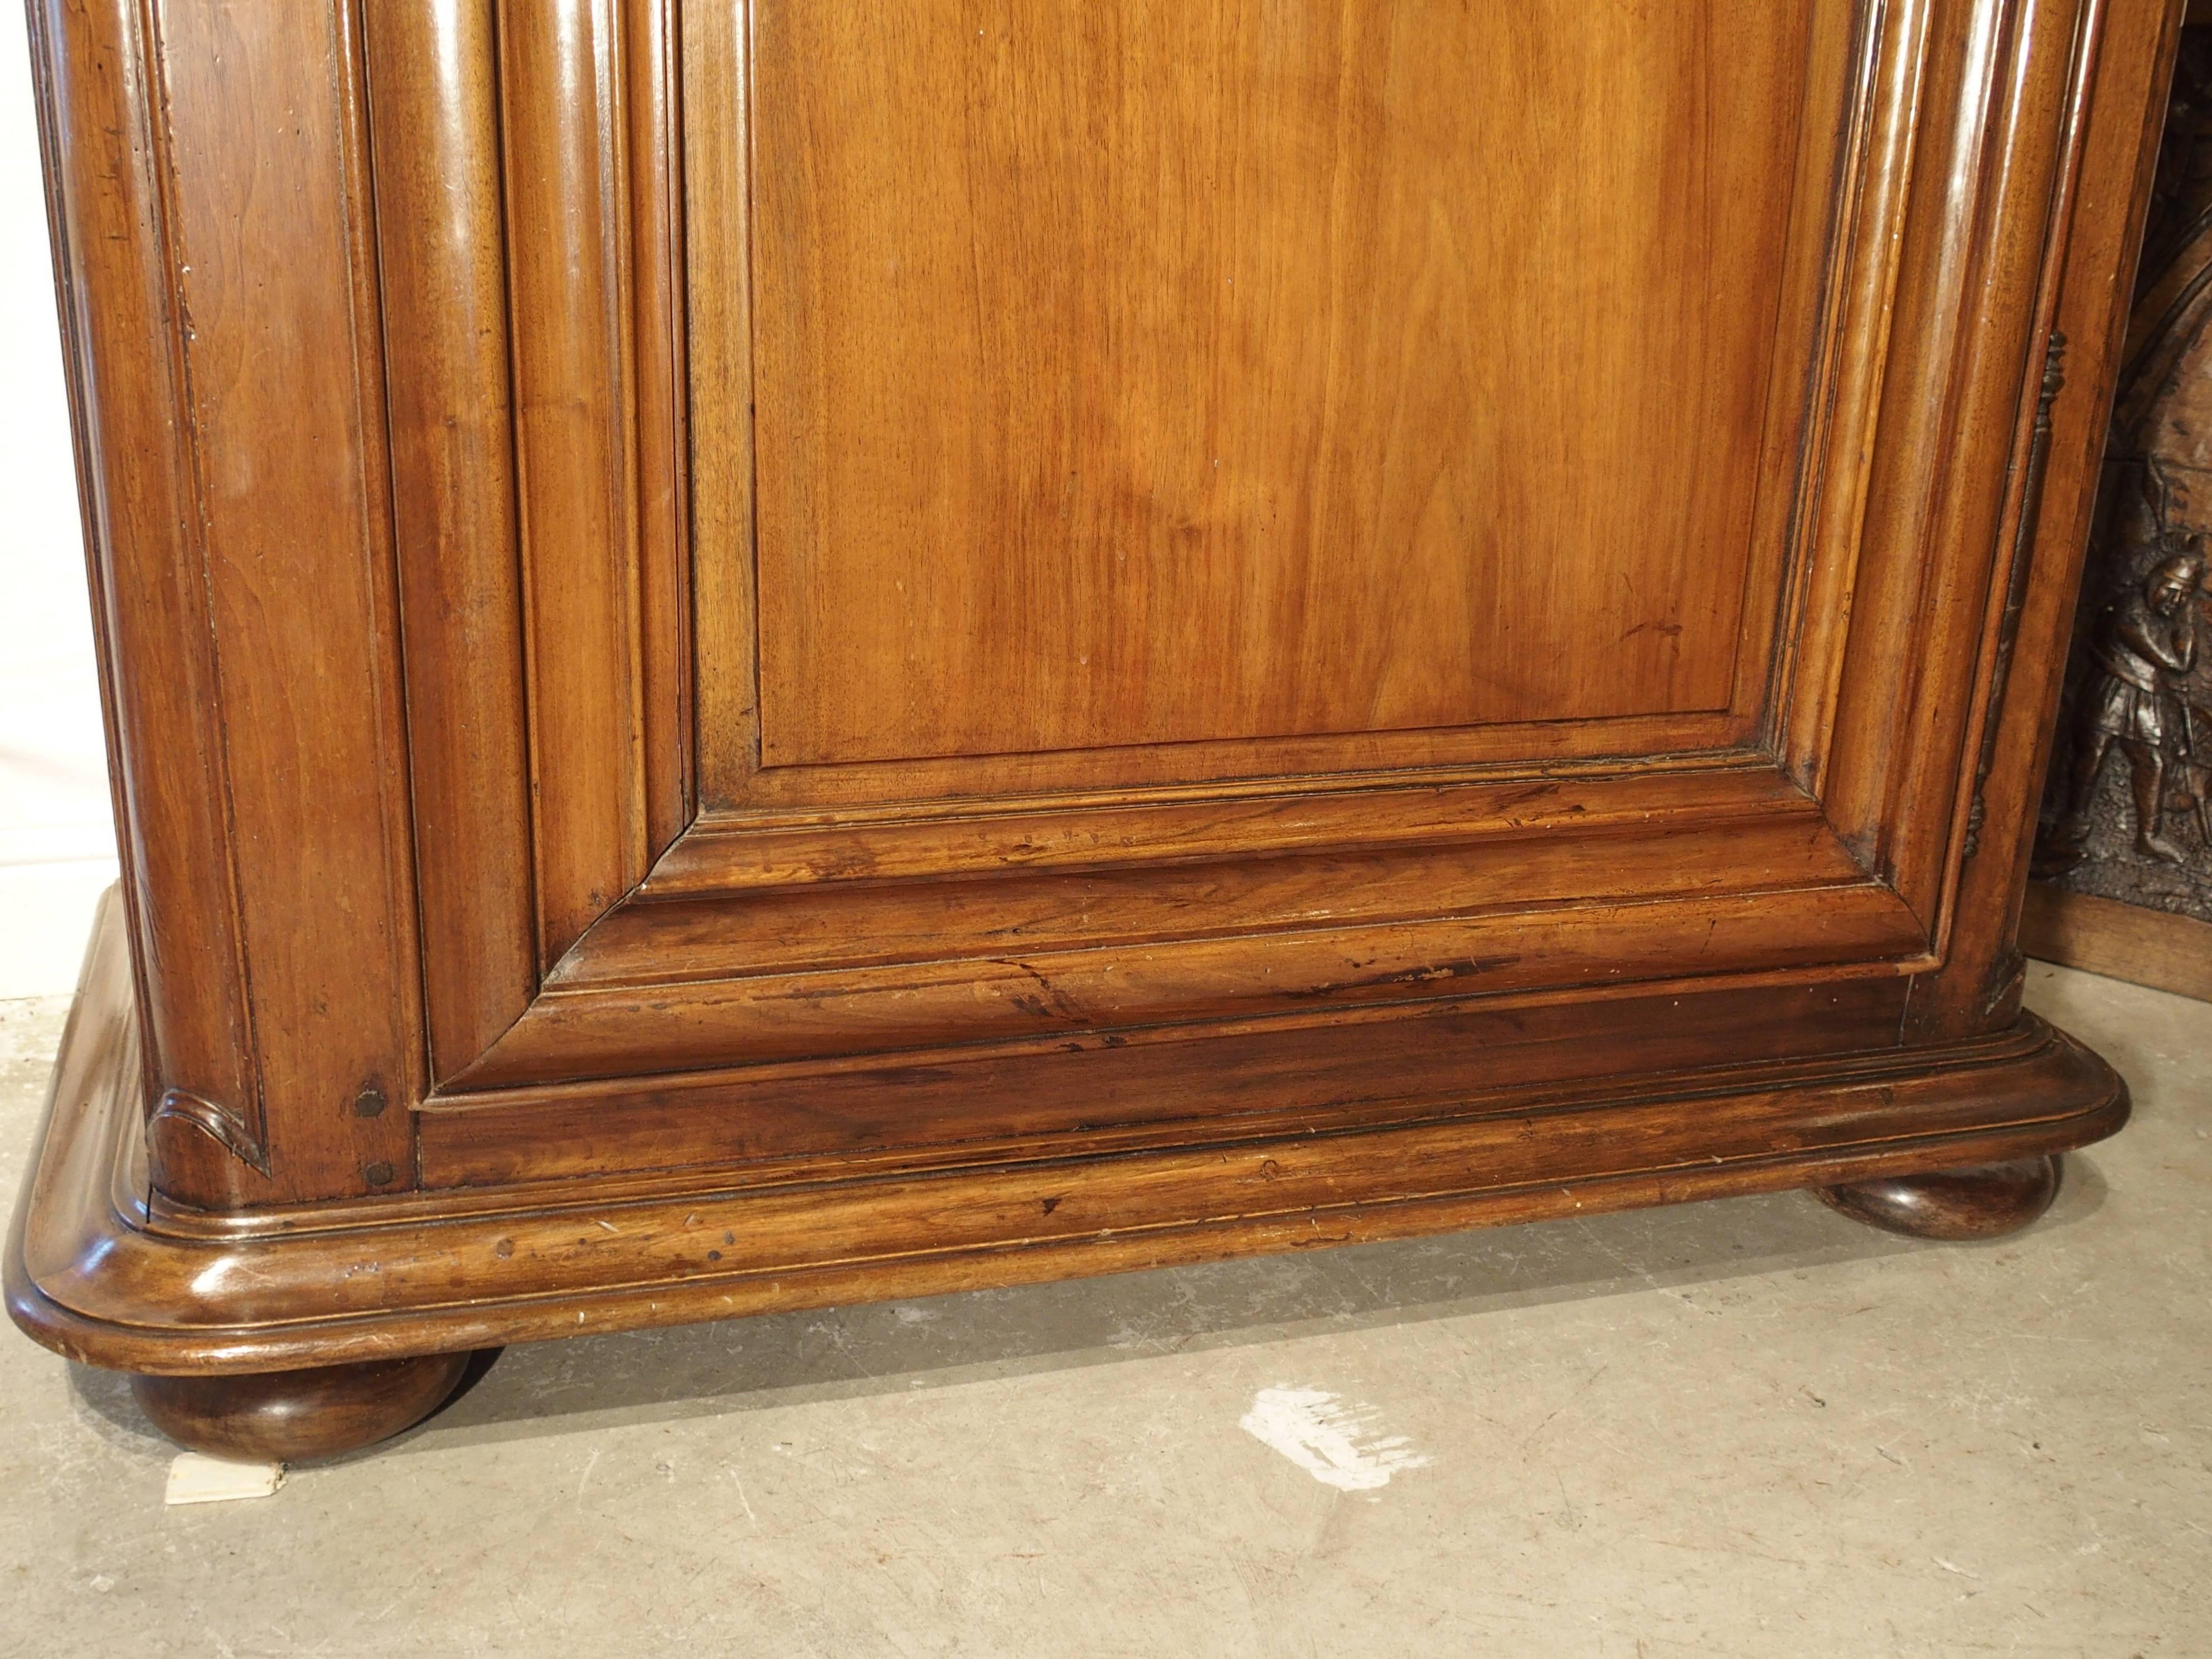 Carved Exceptional 18th Century Walnut Wood Bonnetiere from France